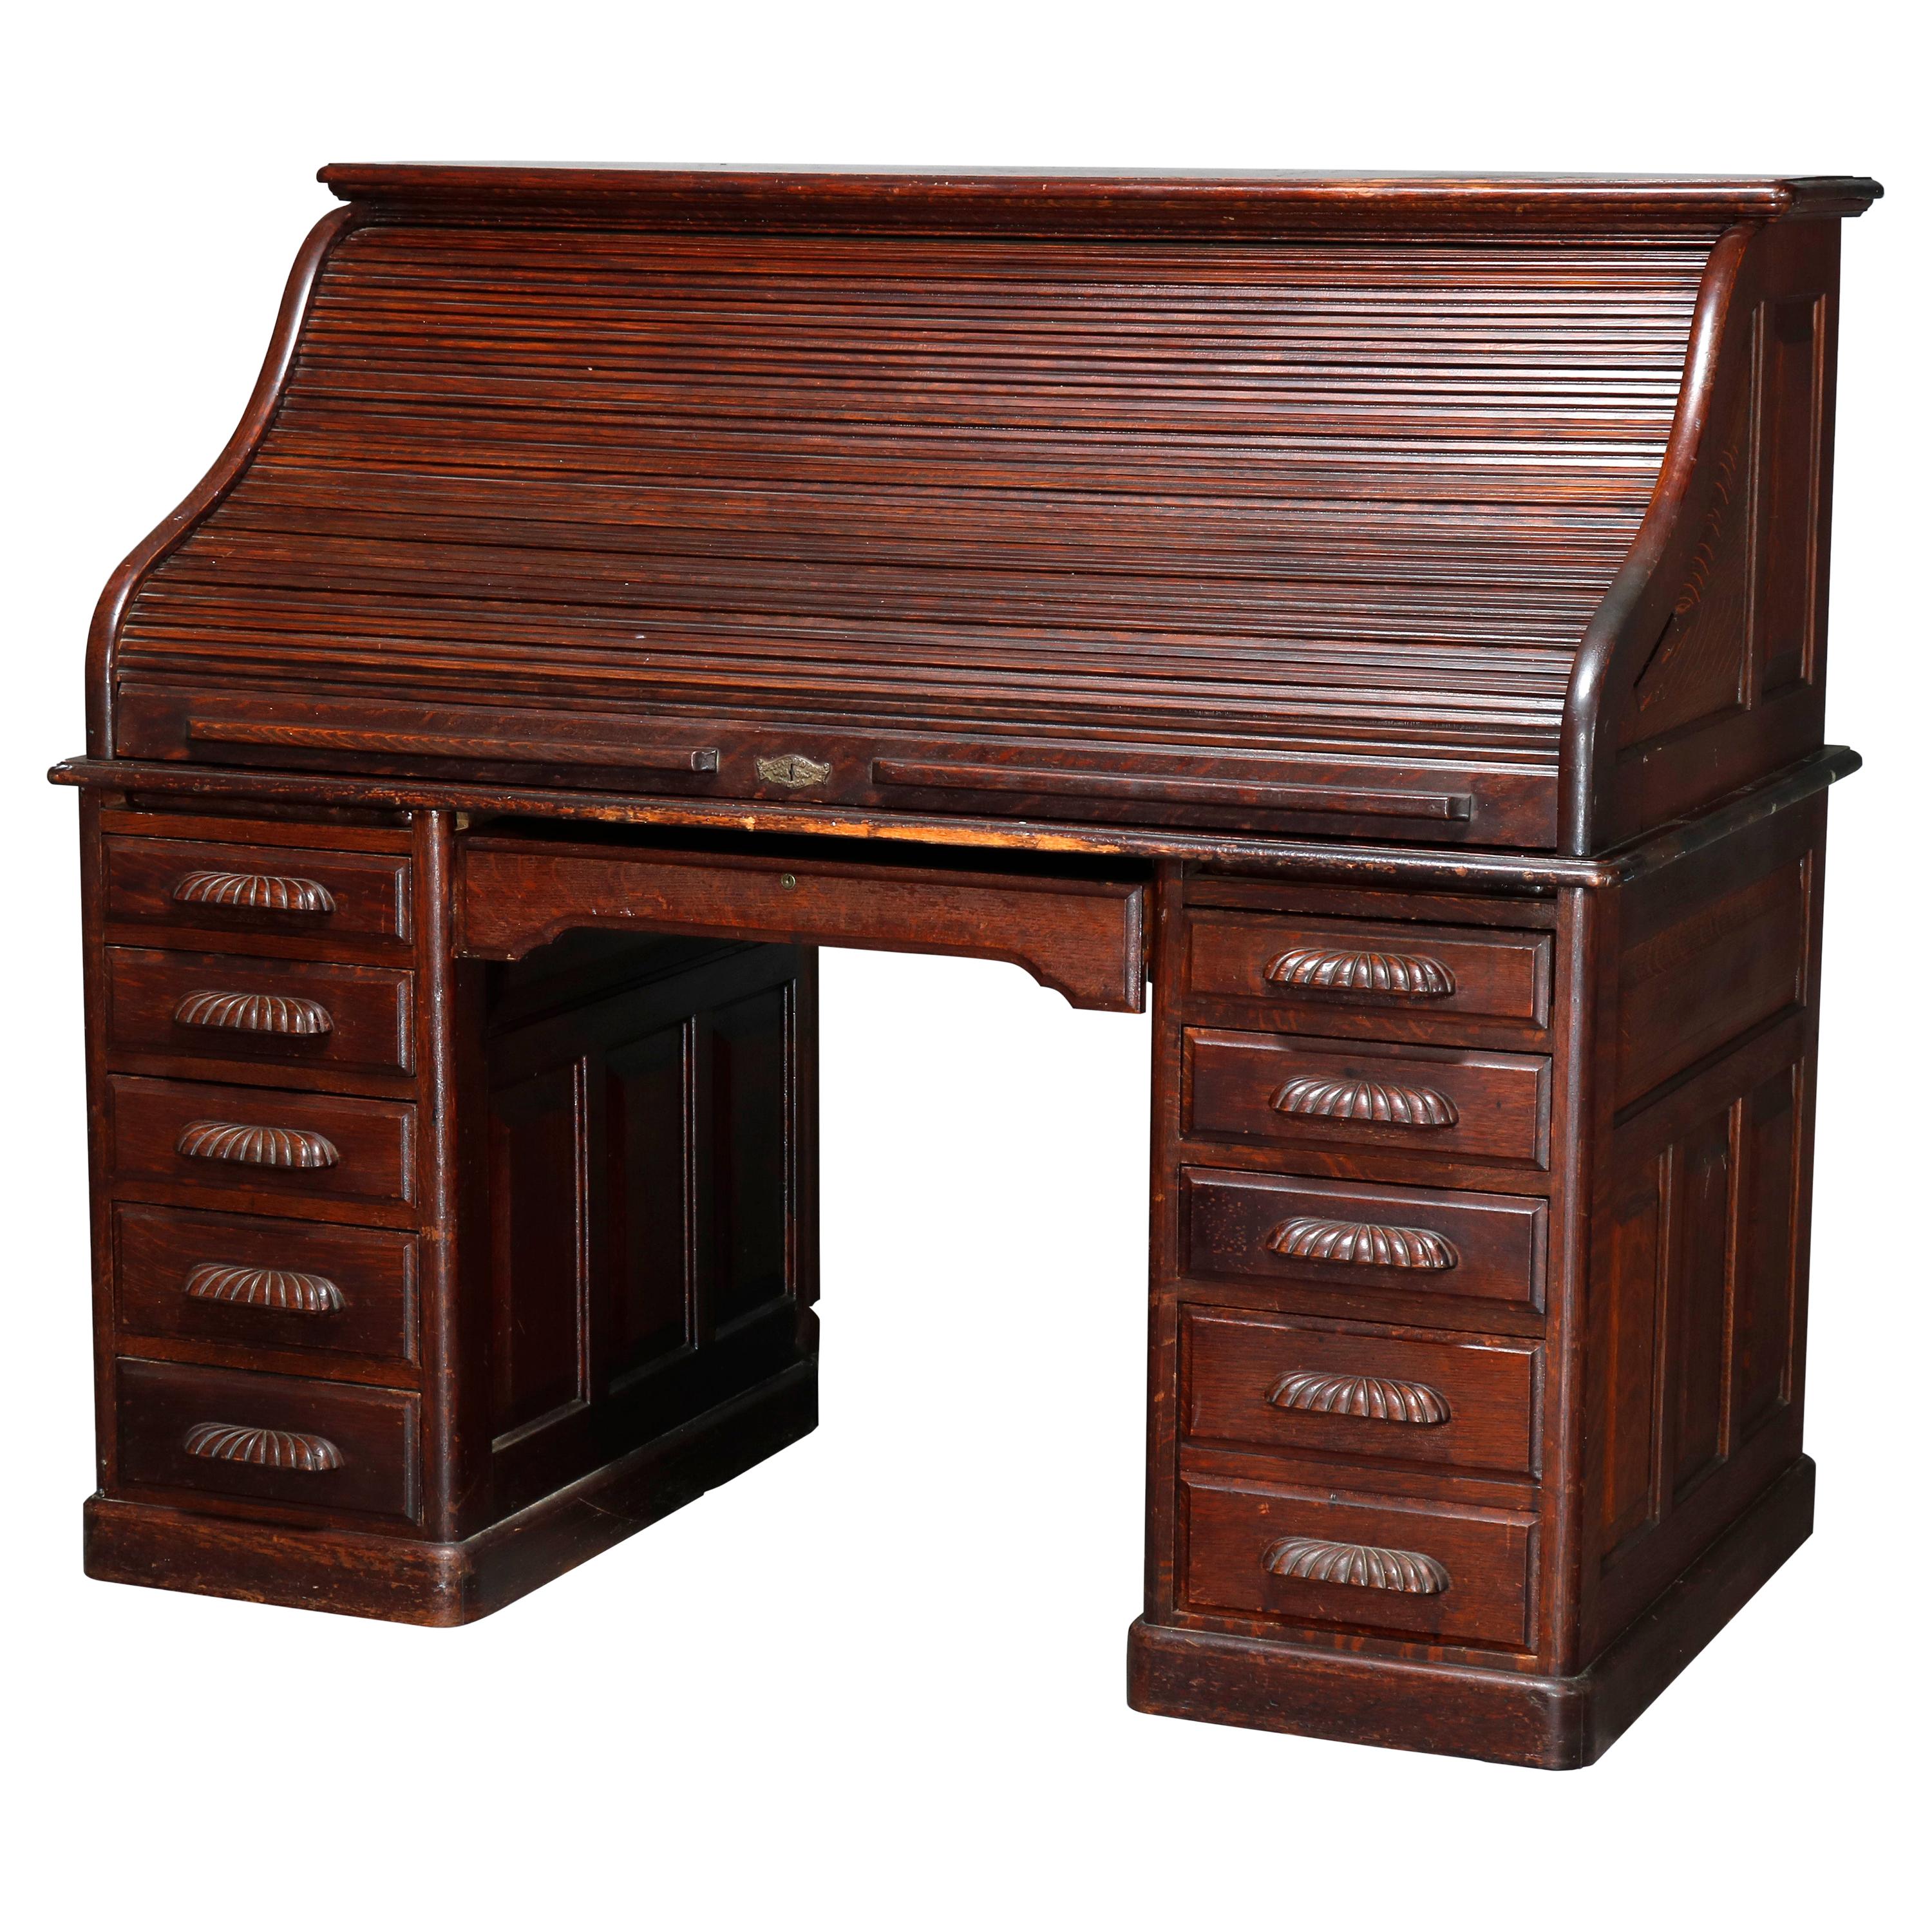 Antique Carved Oak S-Roll Top Desk by EH Staffordshire, c1900